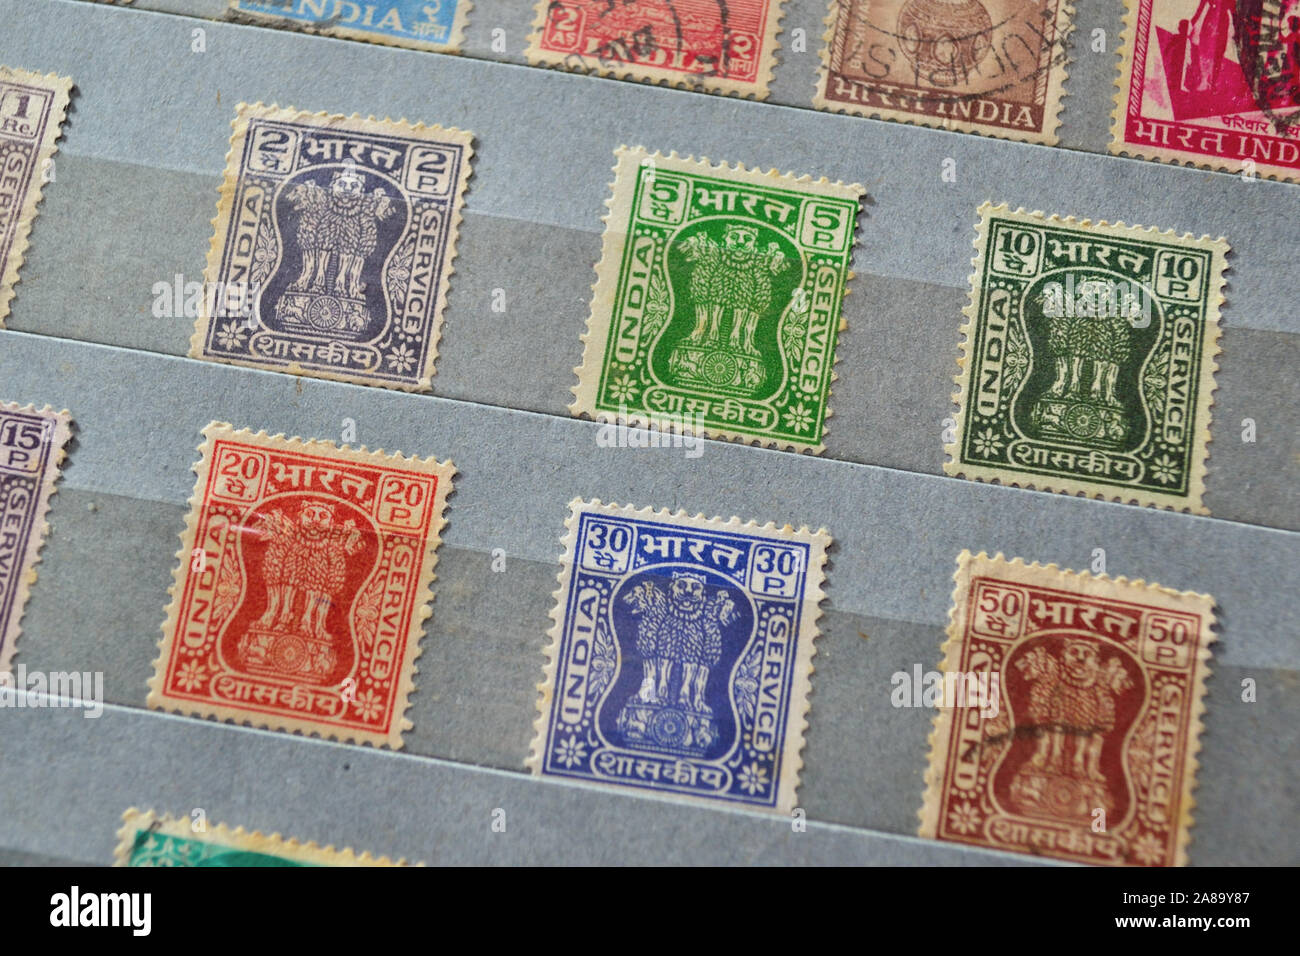 Vintage Indian postage stamps Stock Photo